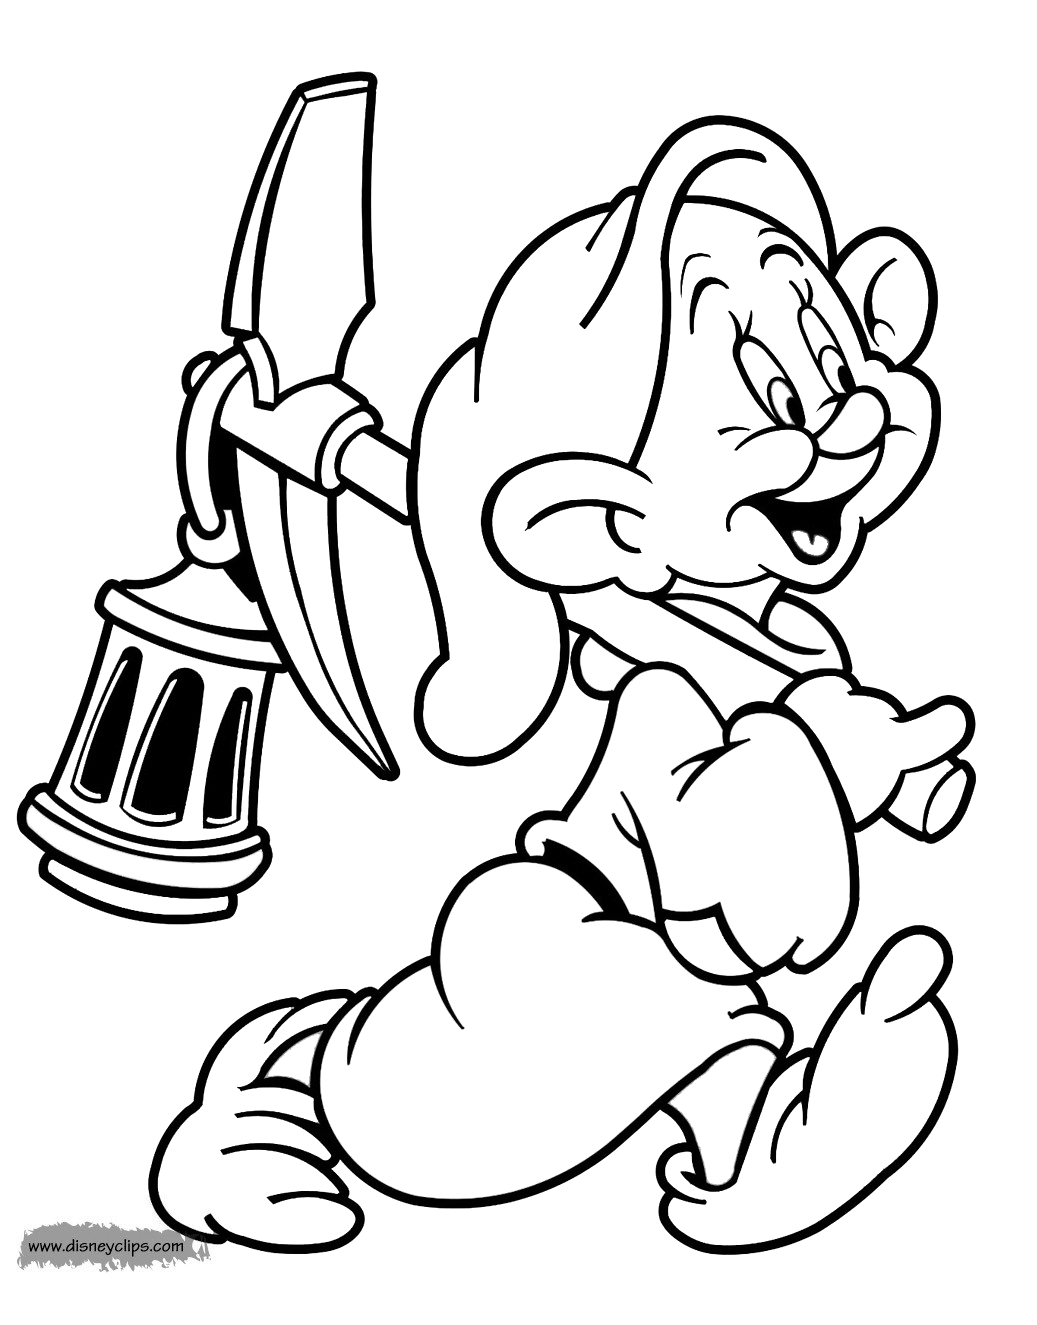 Snow White and the Seven Dwarfs Coloring Pages 5 ...